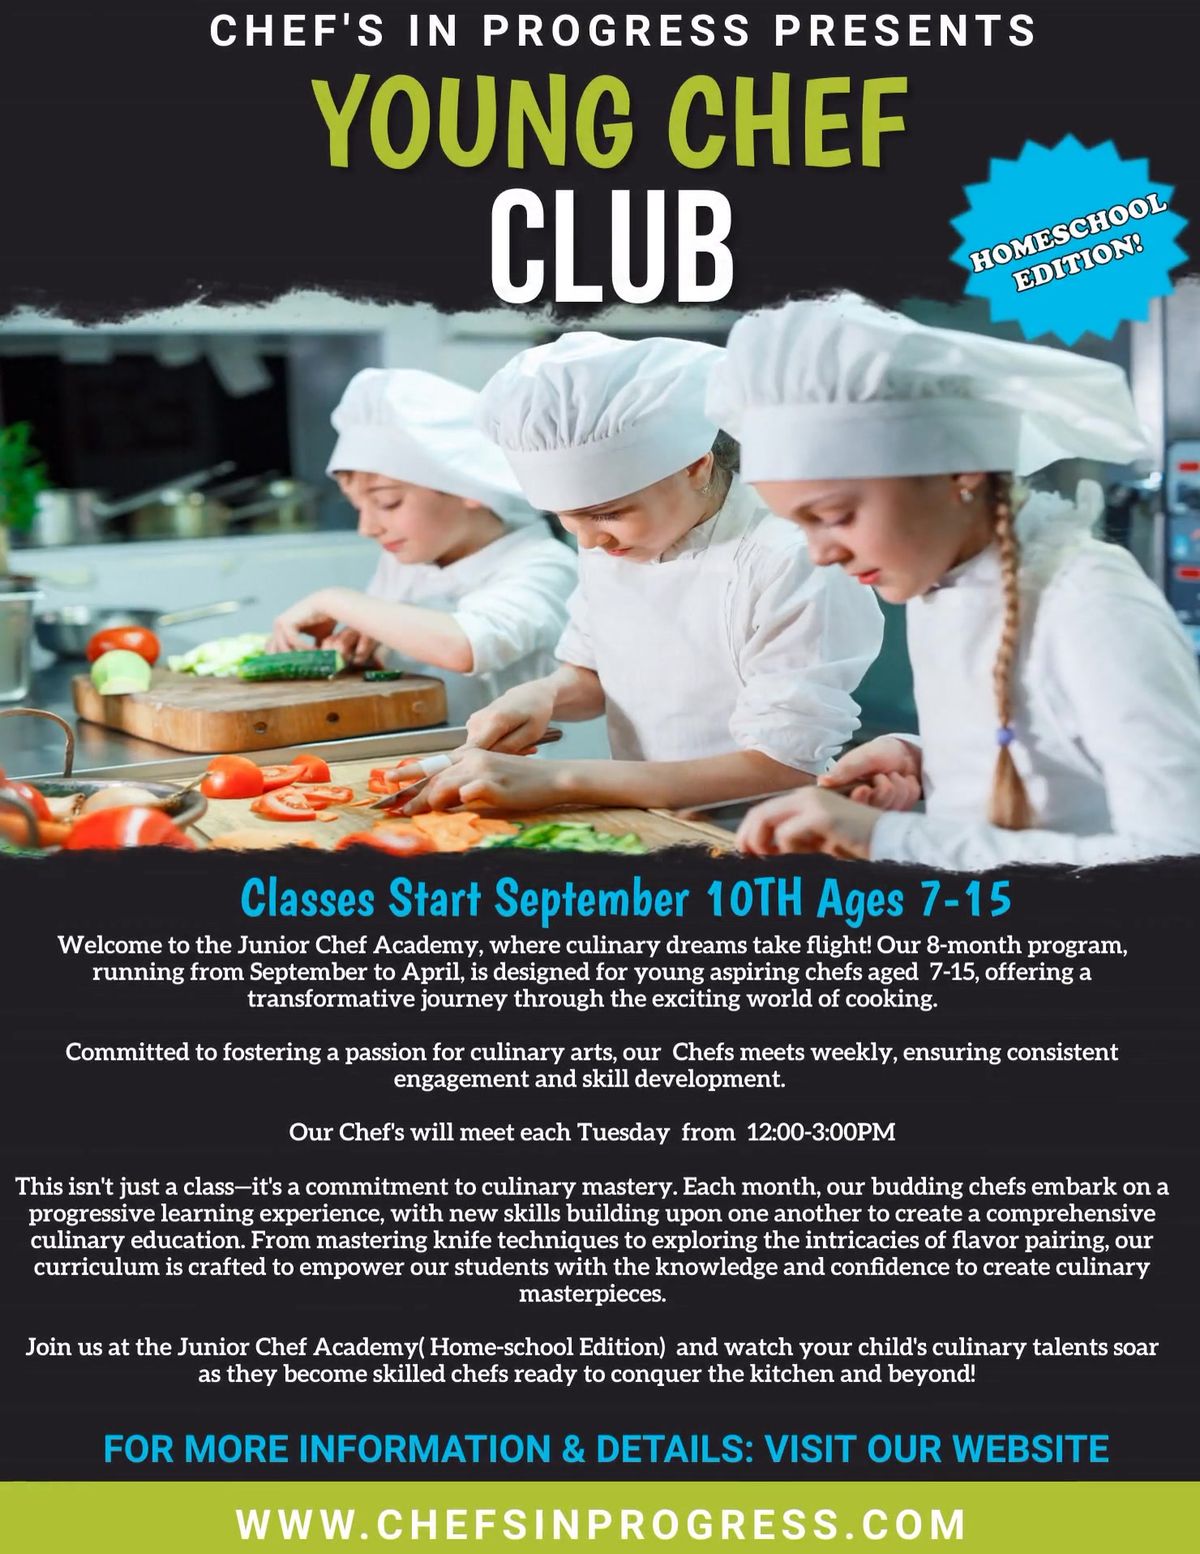 YOUNG CHEF CLUB ( HOME-SCHOOL EDITION MEETING EVERY TUESDAY)